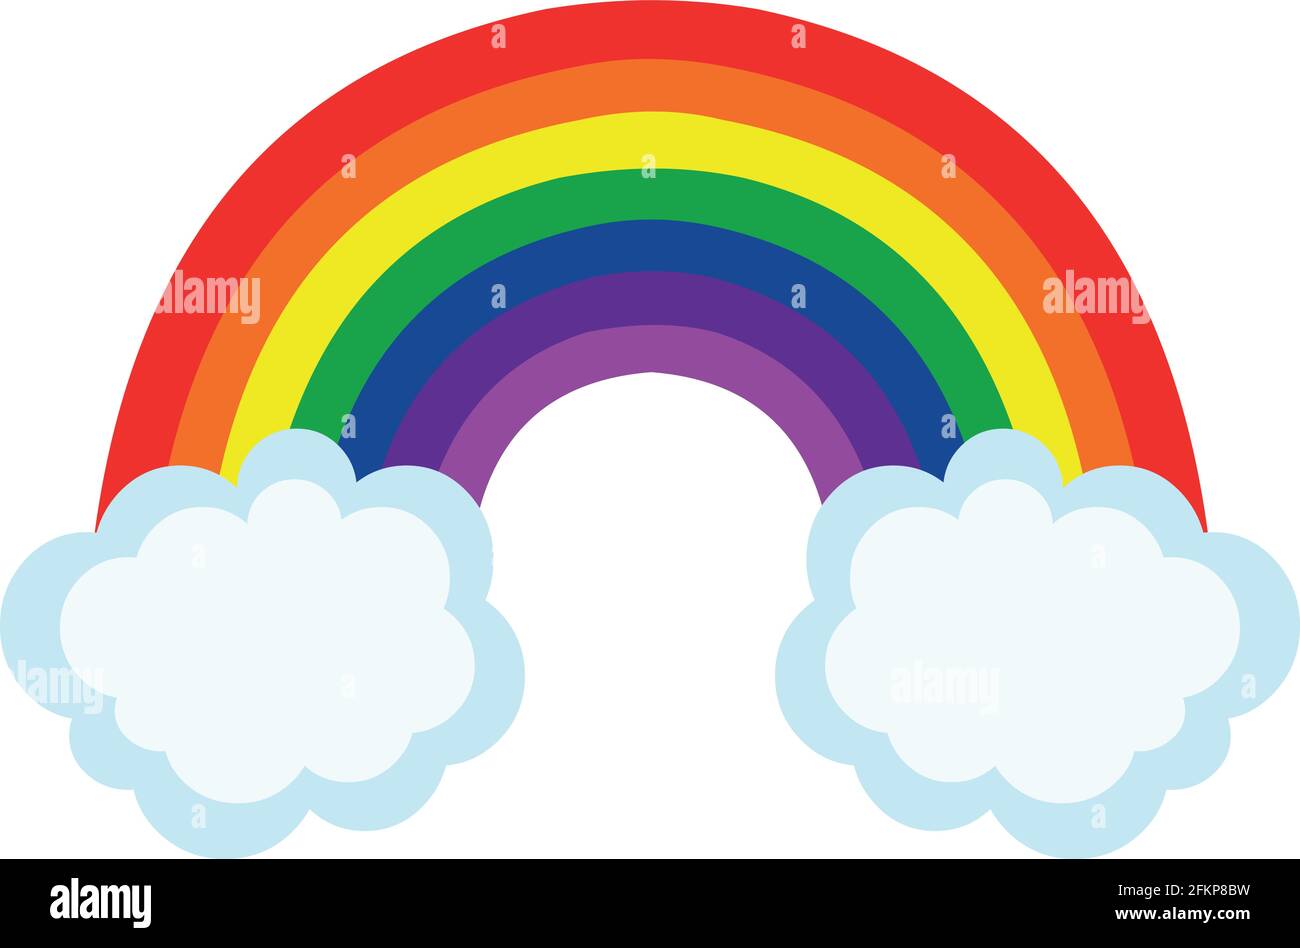 Vector illustration of a rainbow with clouds Stock Vector